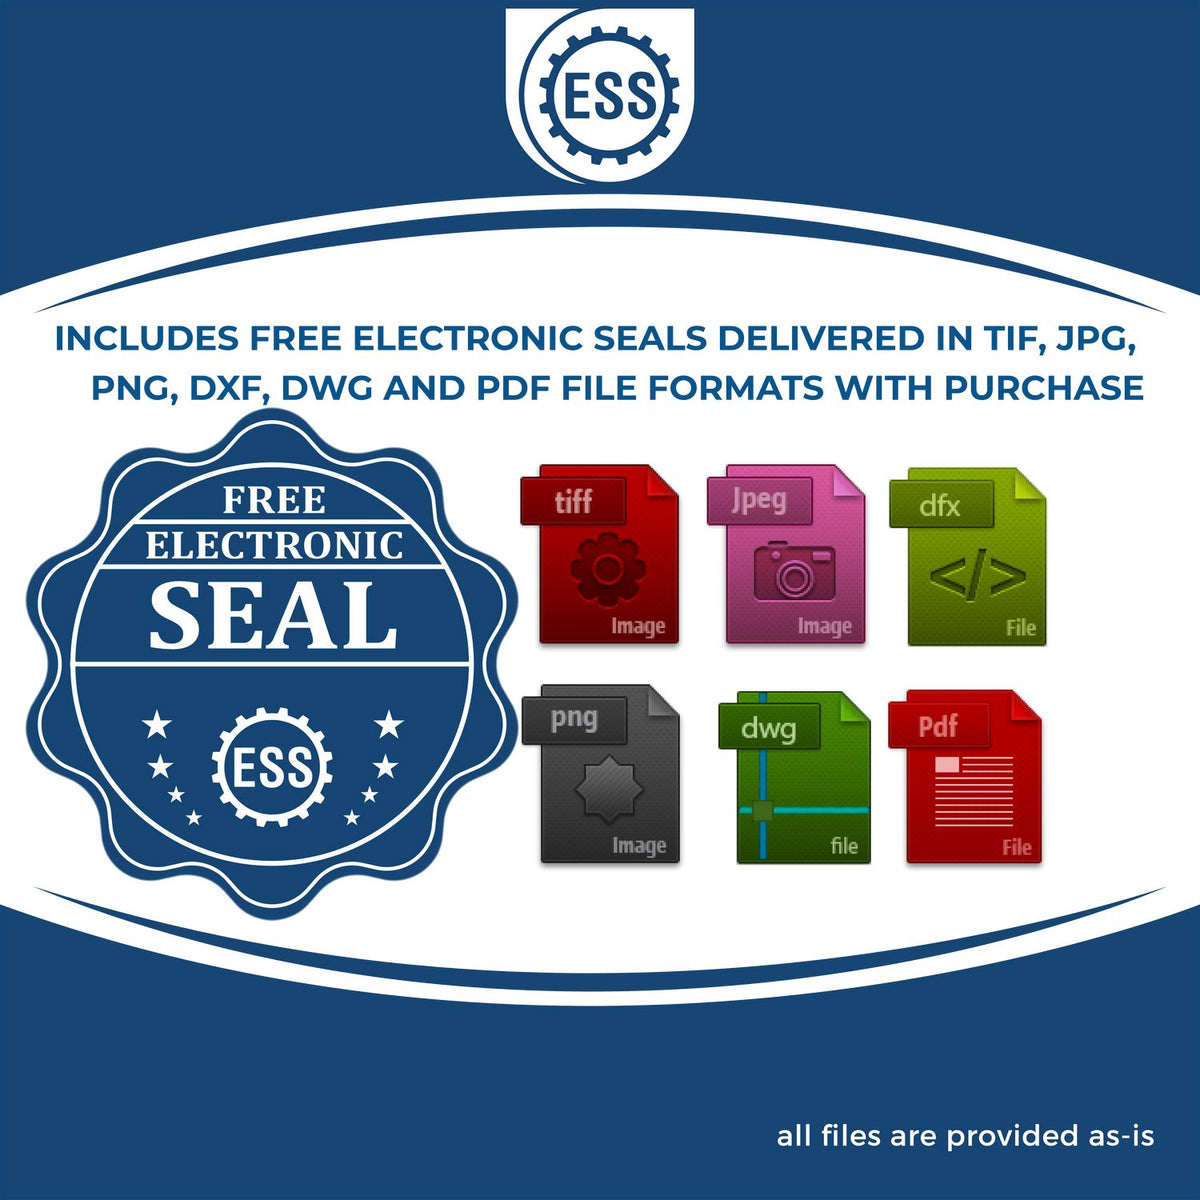 An infographic for the free electronic seal for the Slim Pre-Inked New Hampshire Professional Engineer Seal Stamp illustrating the different file type icons such as DXF, DWG, TIF, JPG and PNG.